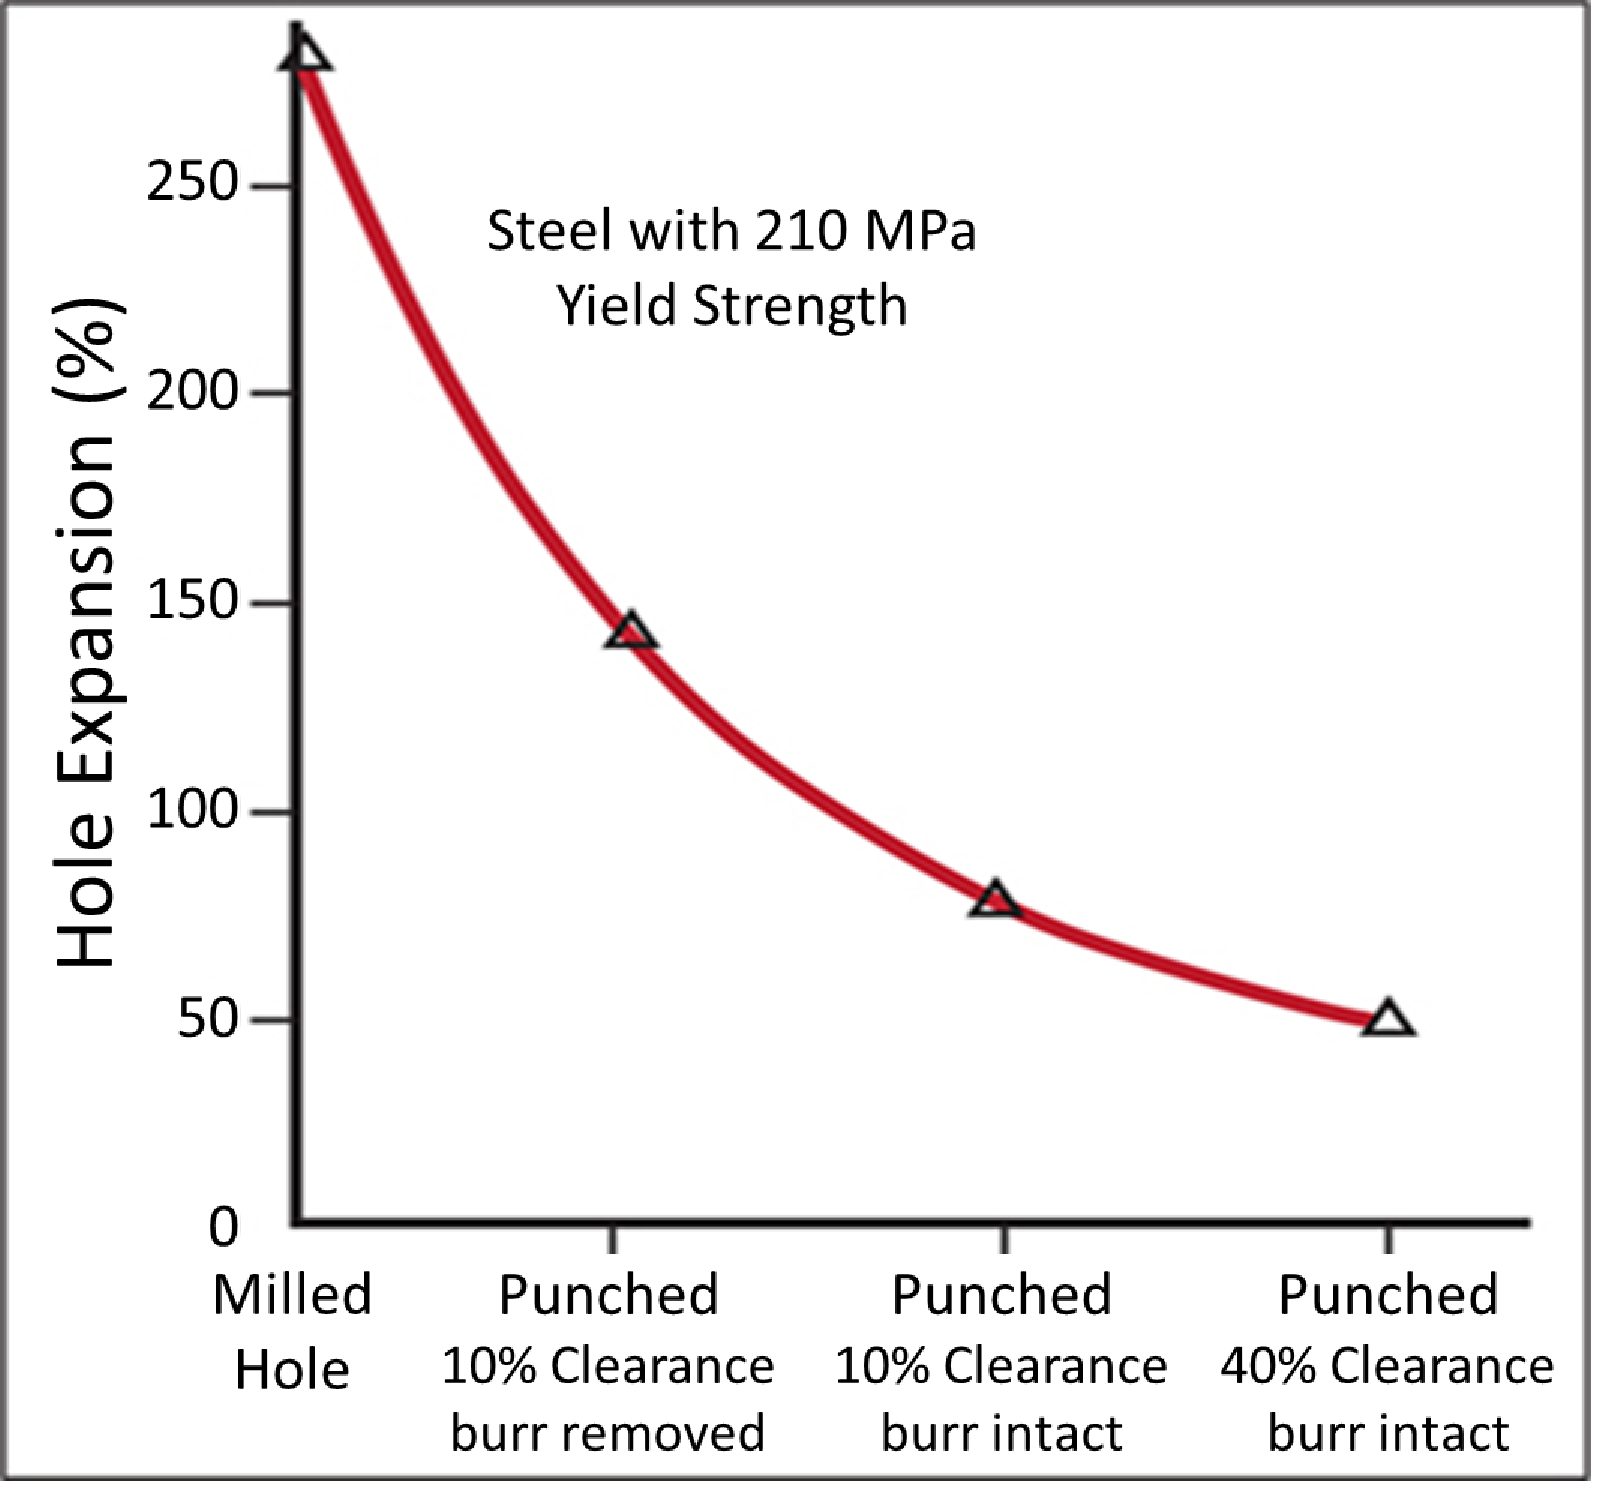 Figure 3: Hole Expansion Capacity Decreased as Edge Quality Decreases. (Based on data from Citation H-1.)